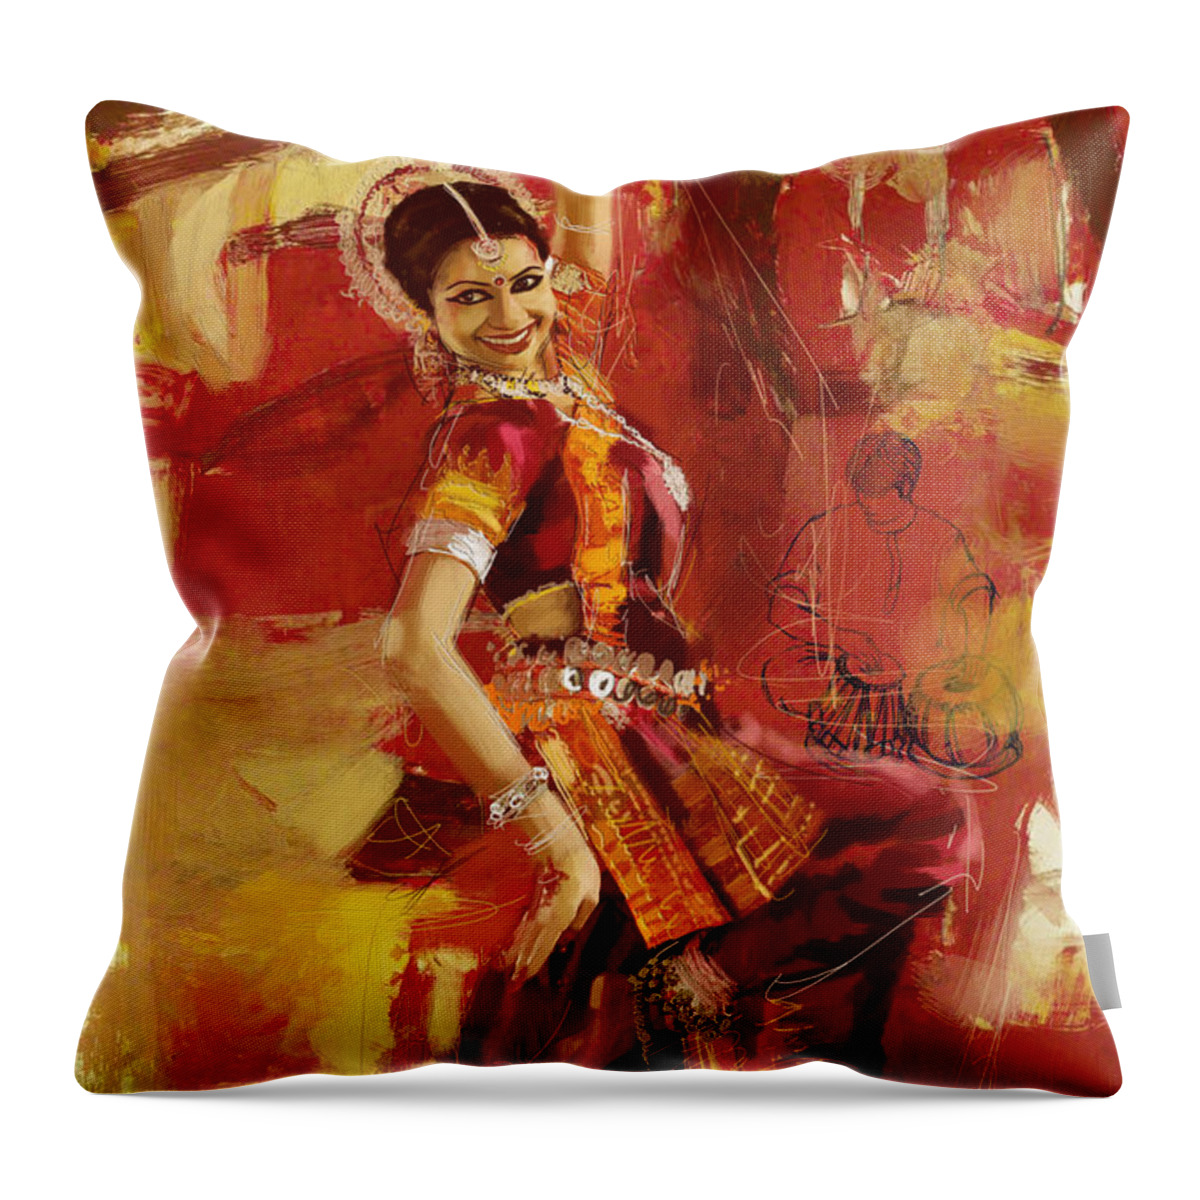 Dancer Throw Pillow featuring the painting Kathak Dancer 6 by Corporate Art Task Force